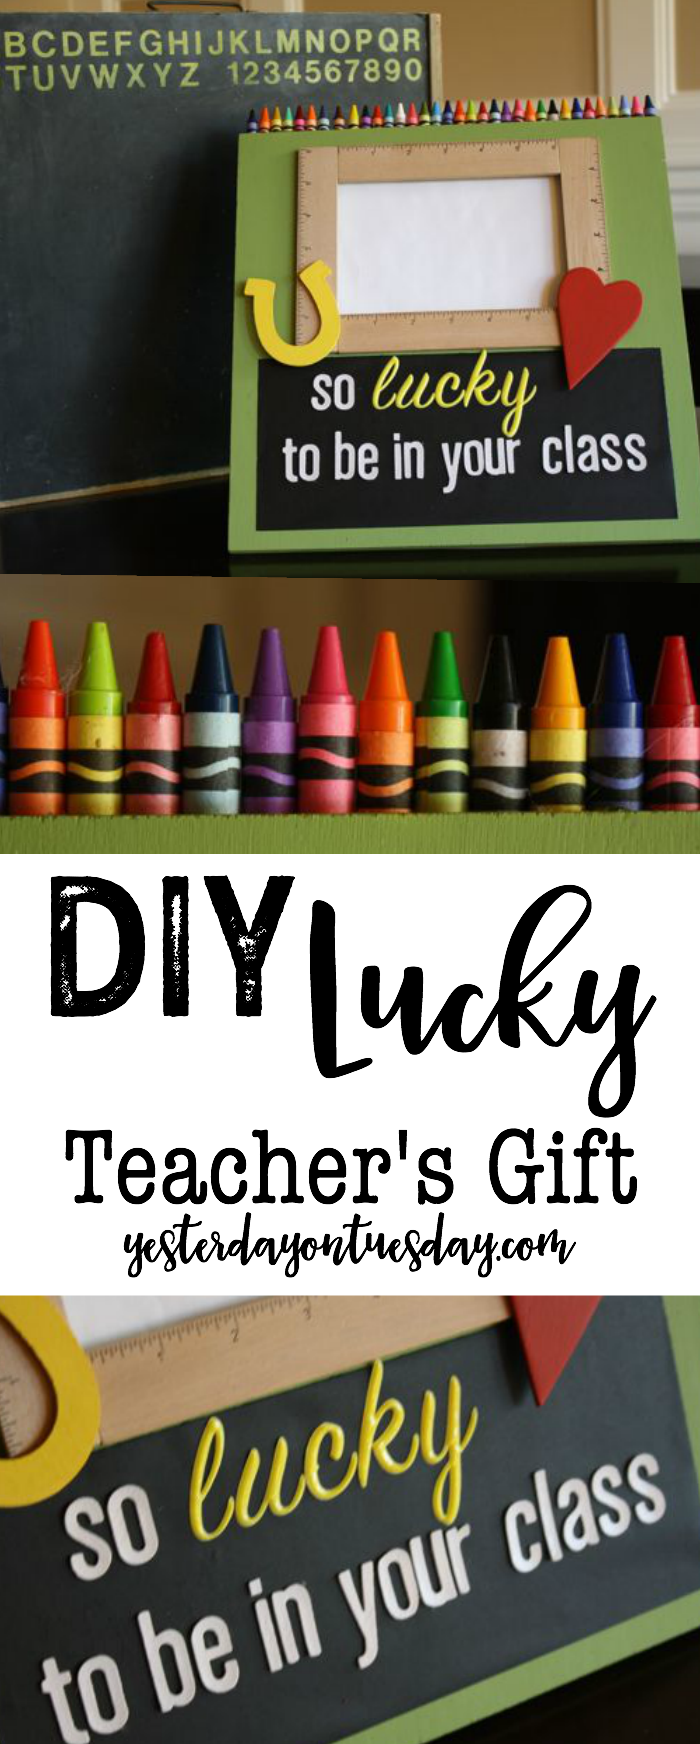 DIY Lucky Teacher's Gift: Colorful and fun frame, great teacher's gift idea, also great for St. Patrick's Day!